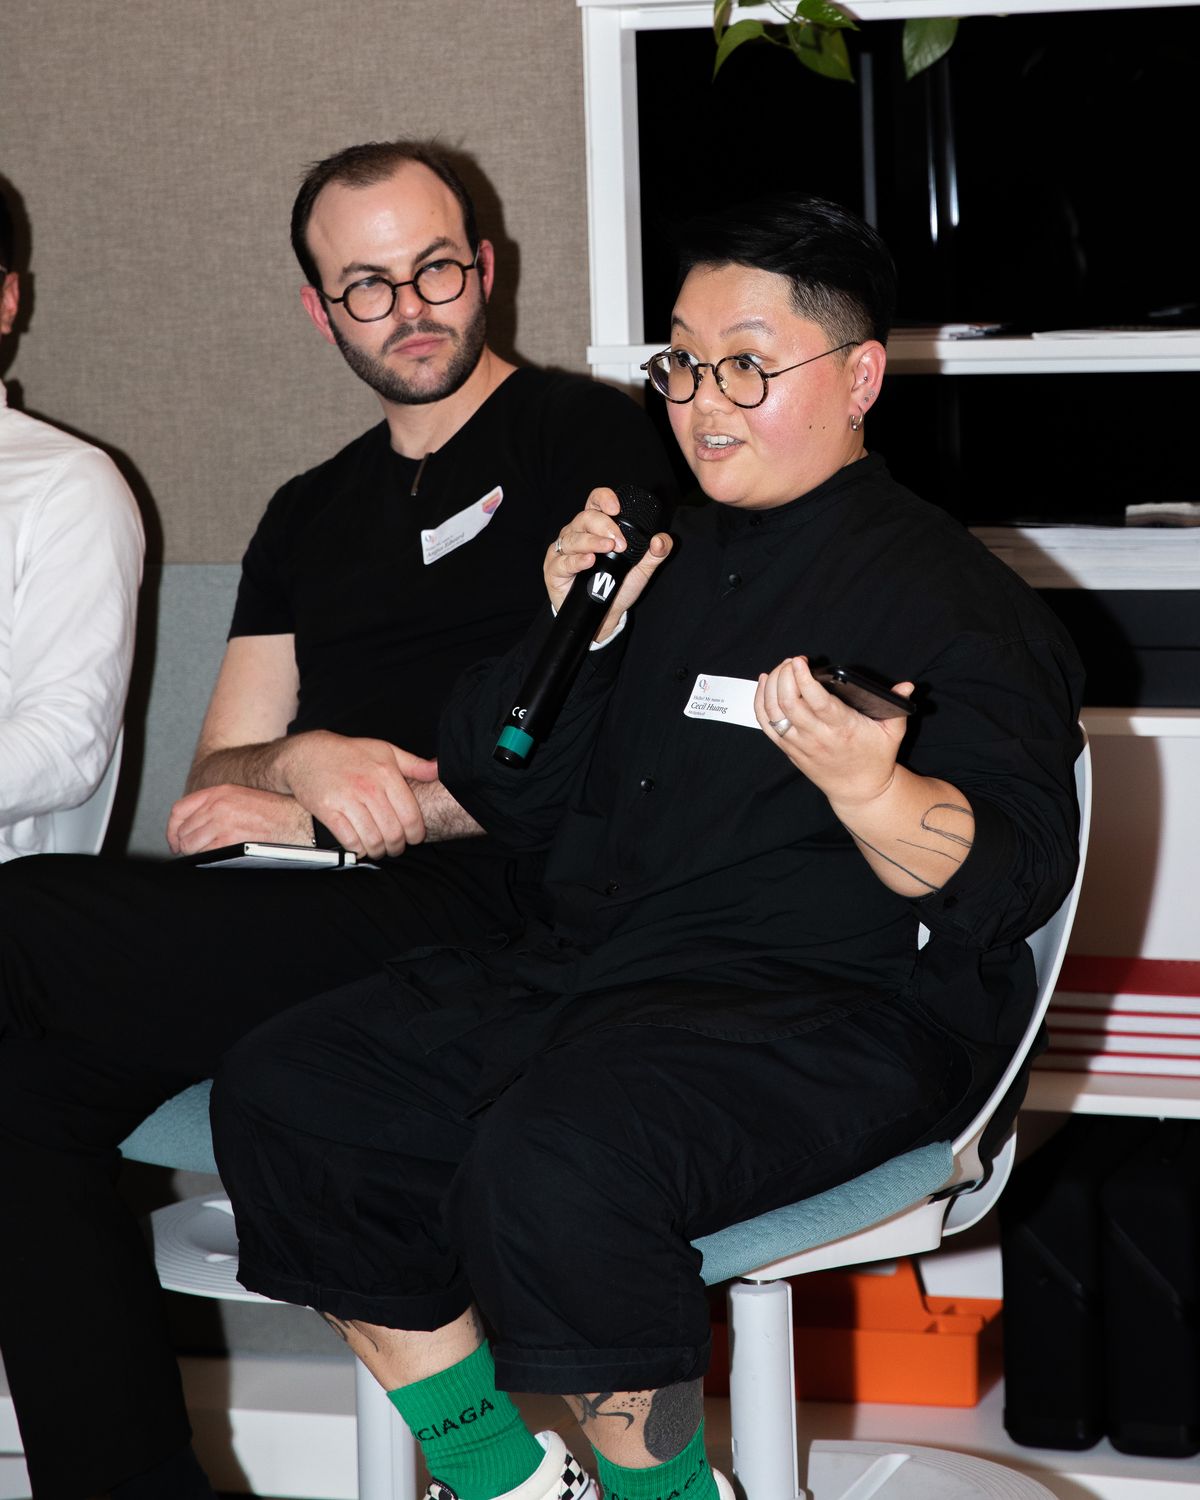 Queers in Property panel discussion at Living Edge in Melbourne